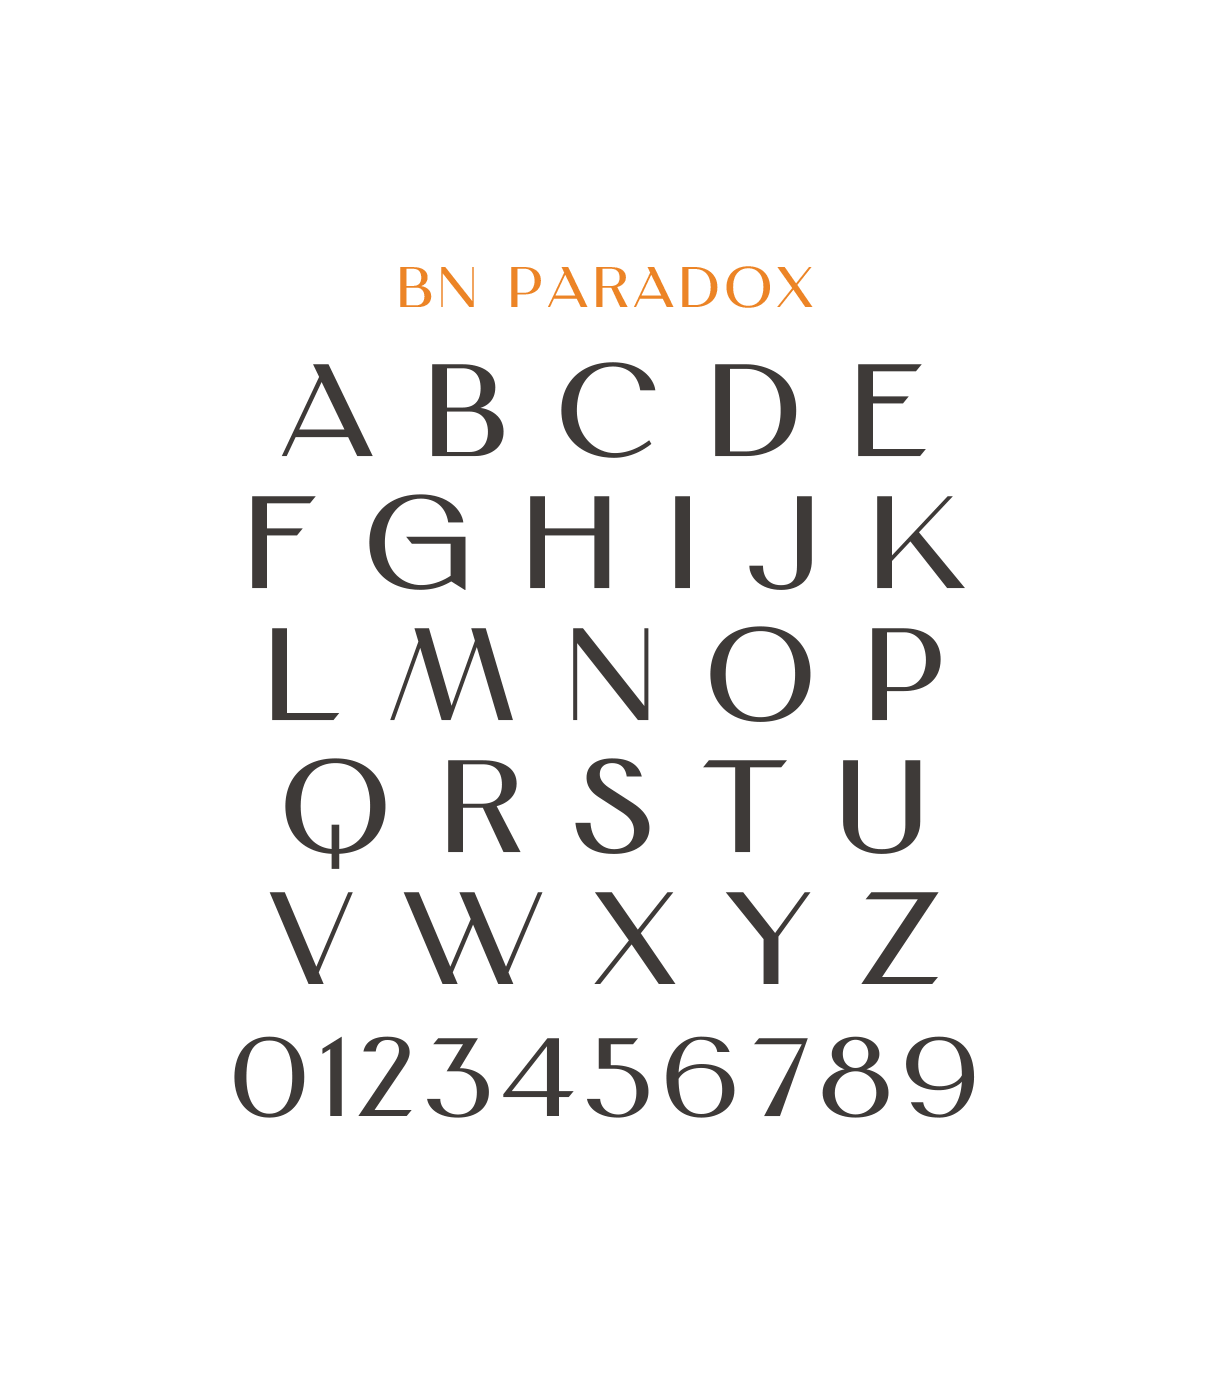 BN Paradox brand font showcasing all the characters